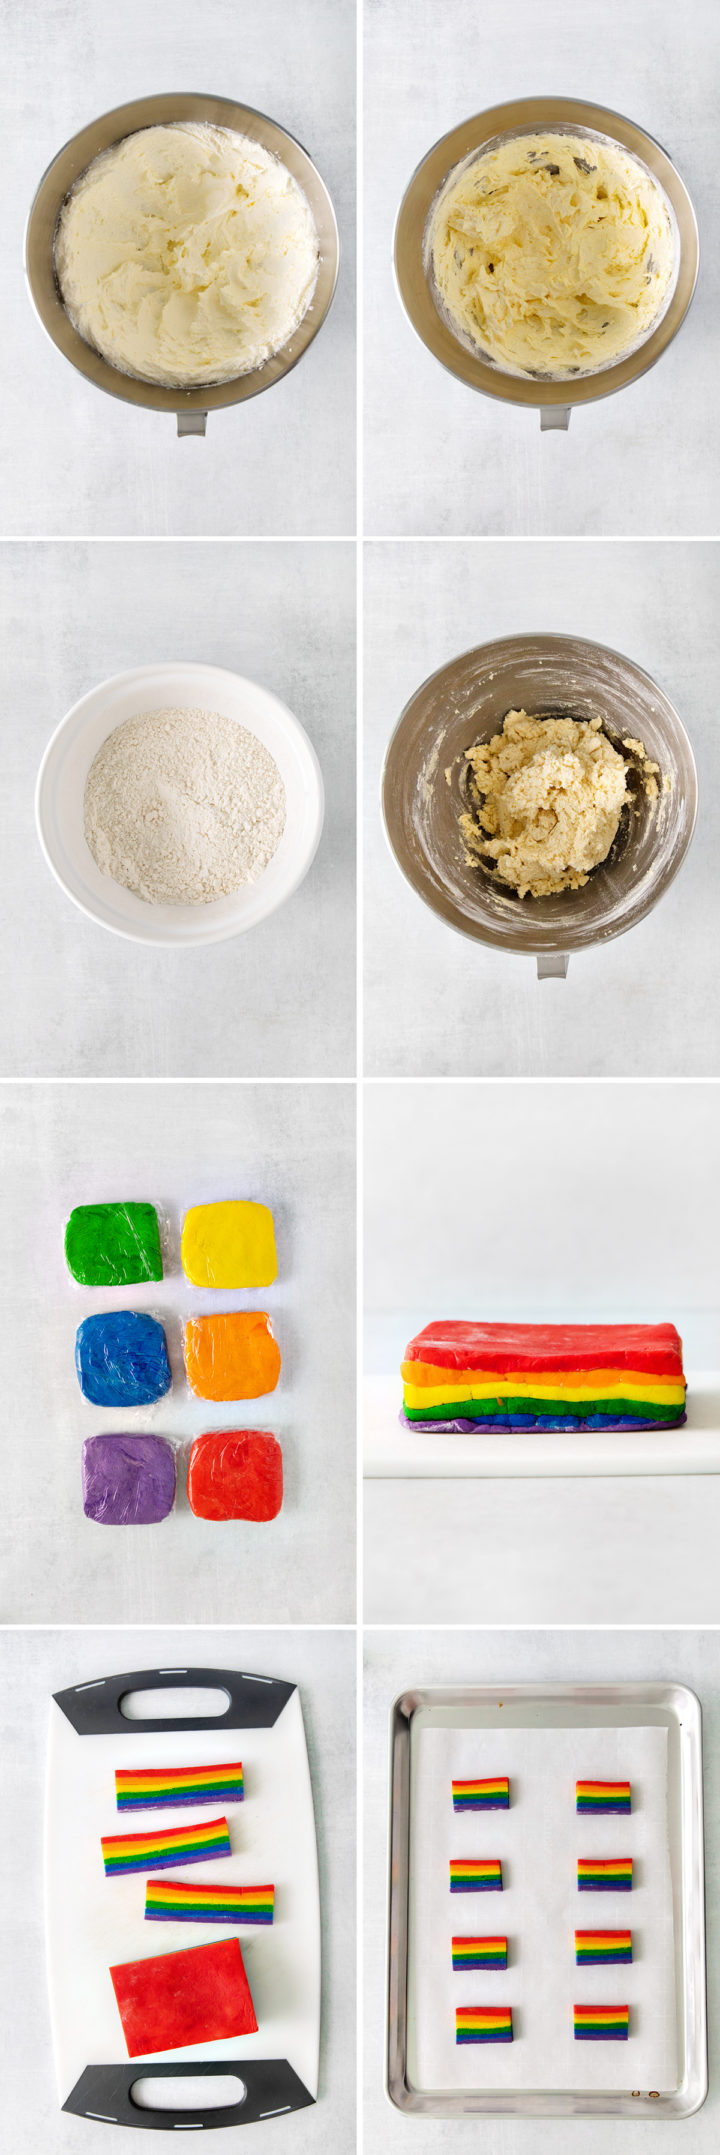 step by step photos showing how to make rainbow sugar cookie dough for baking st patricks day cookies